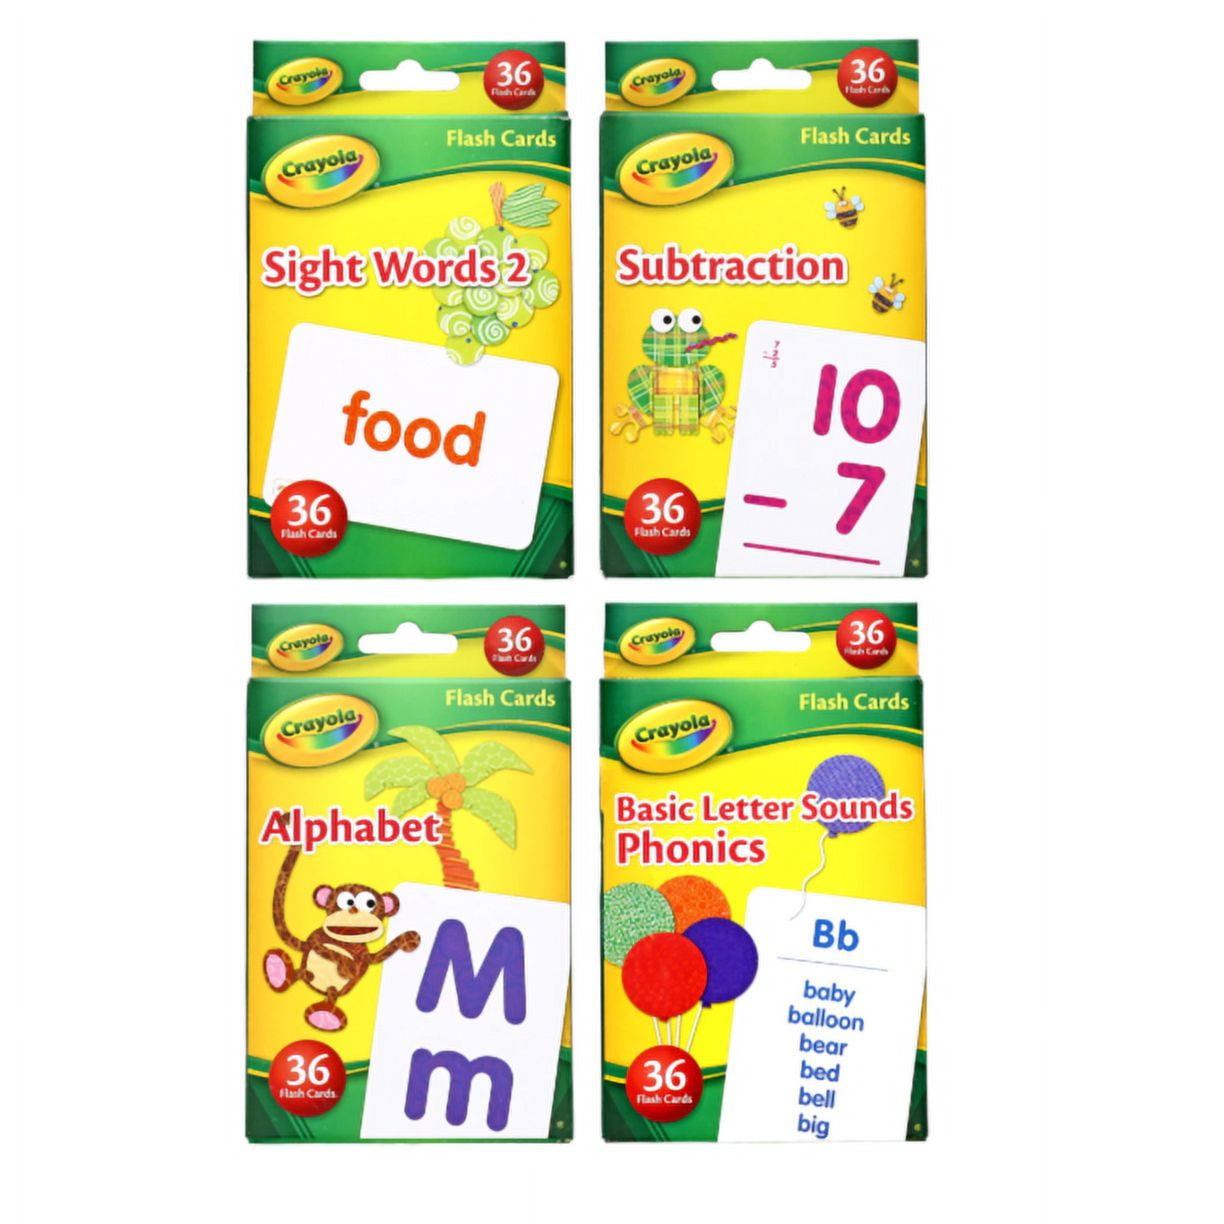 Flash Cards 36-ct. Box 4 Packs- Learn Phonics, Colors & Shapes, Counting,  and Alphabet Fun Learning & Educational Flashcards Toys Preschool Picture  